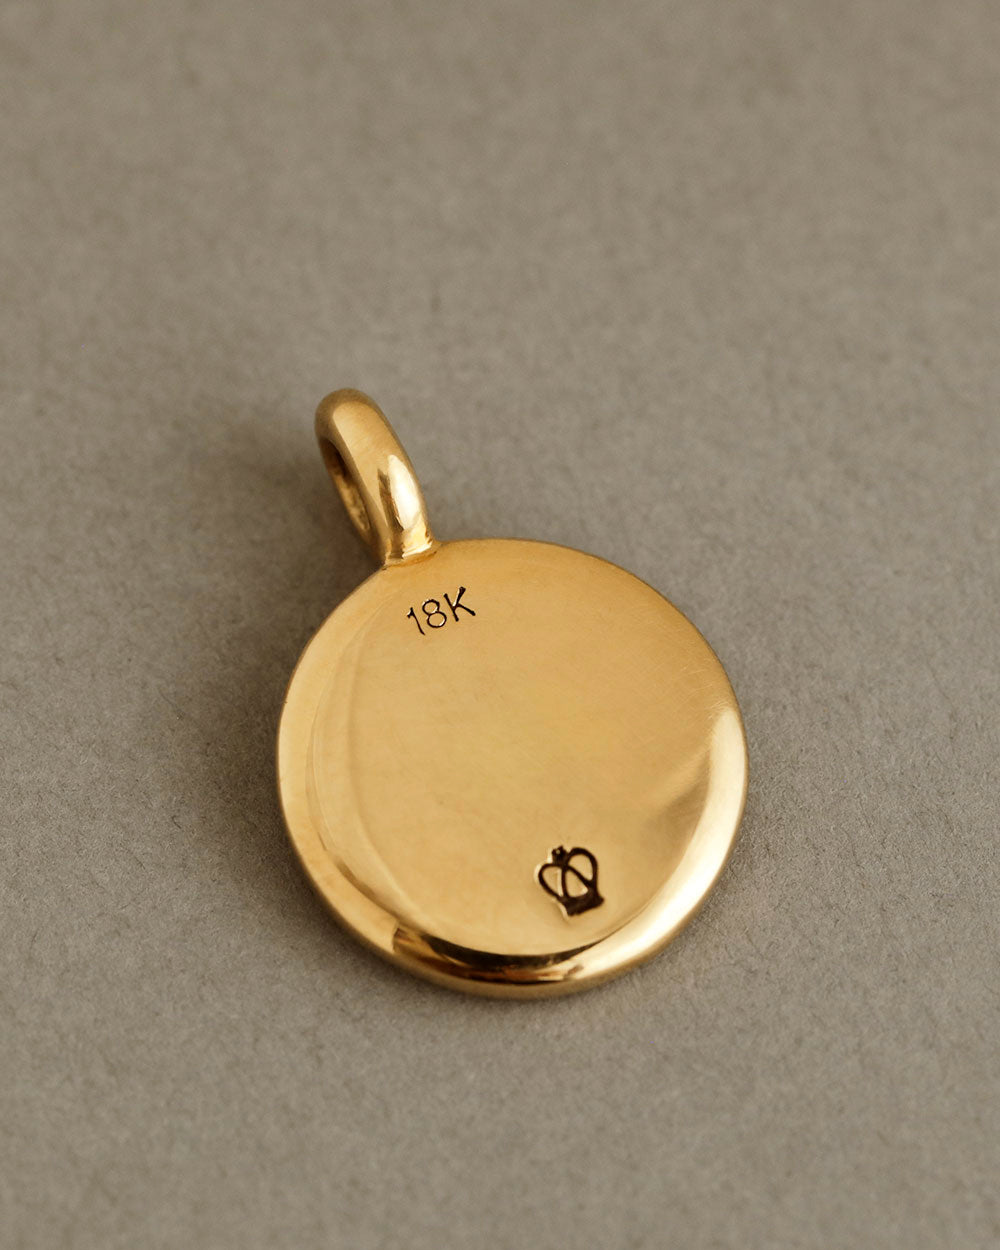 Dutch Coin Pendant by George Rings circle coin round gold pendant solid 18k gold